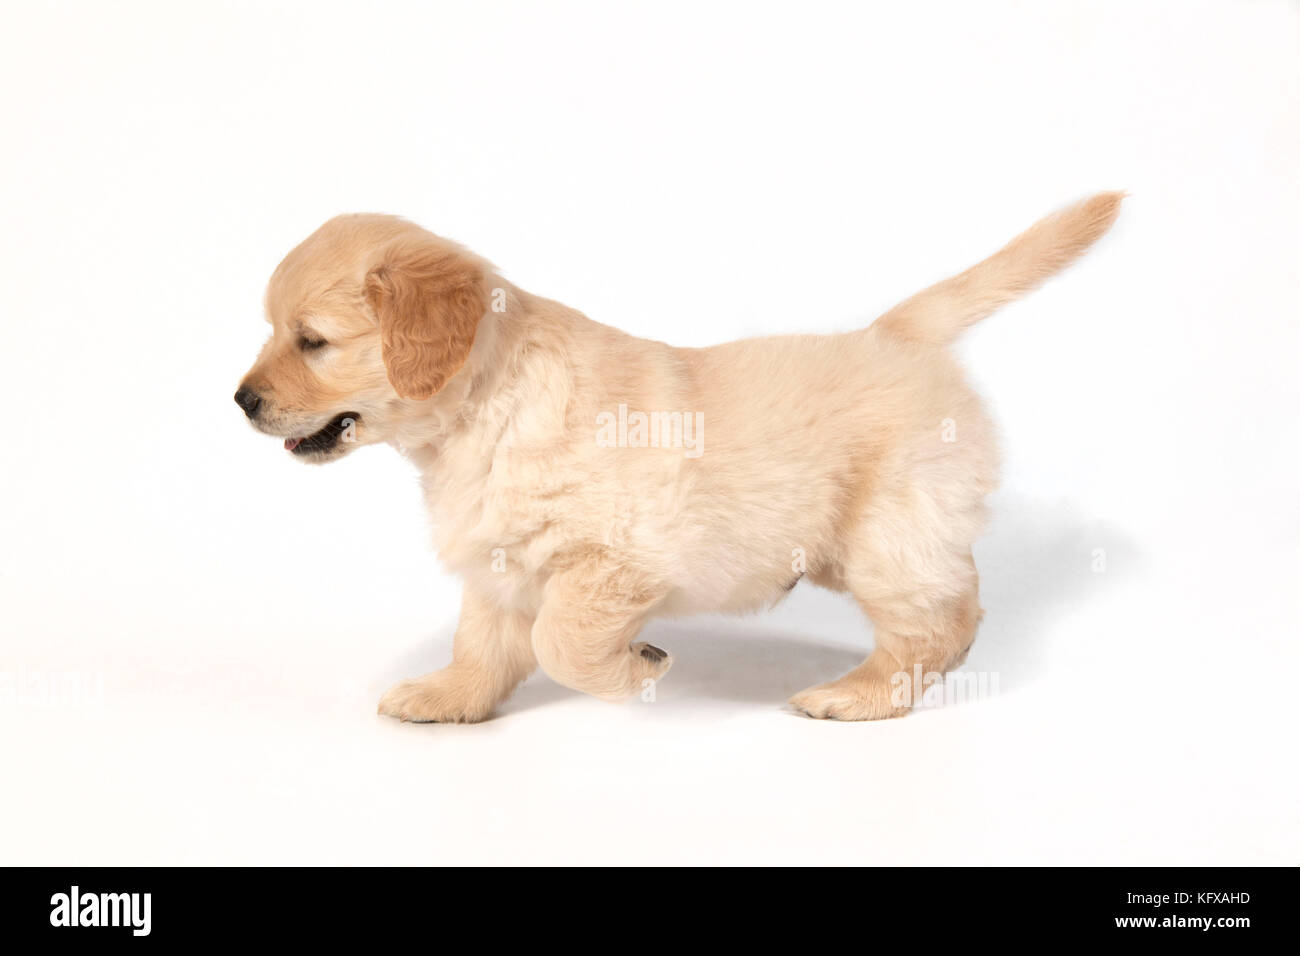 DOG - Golden Retriever 7 weeks old - standing; one front paw raised . Stock Photo